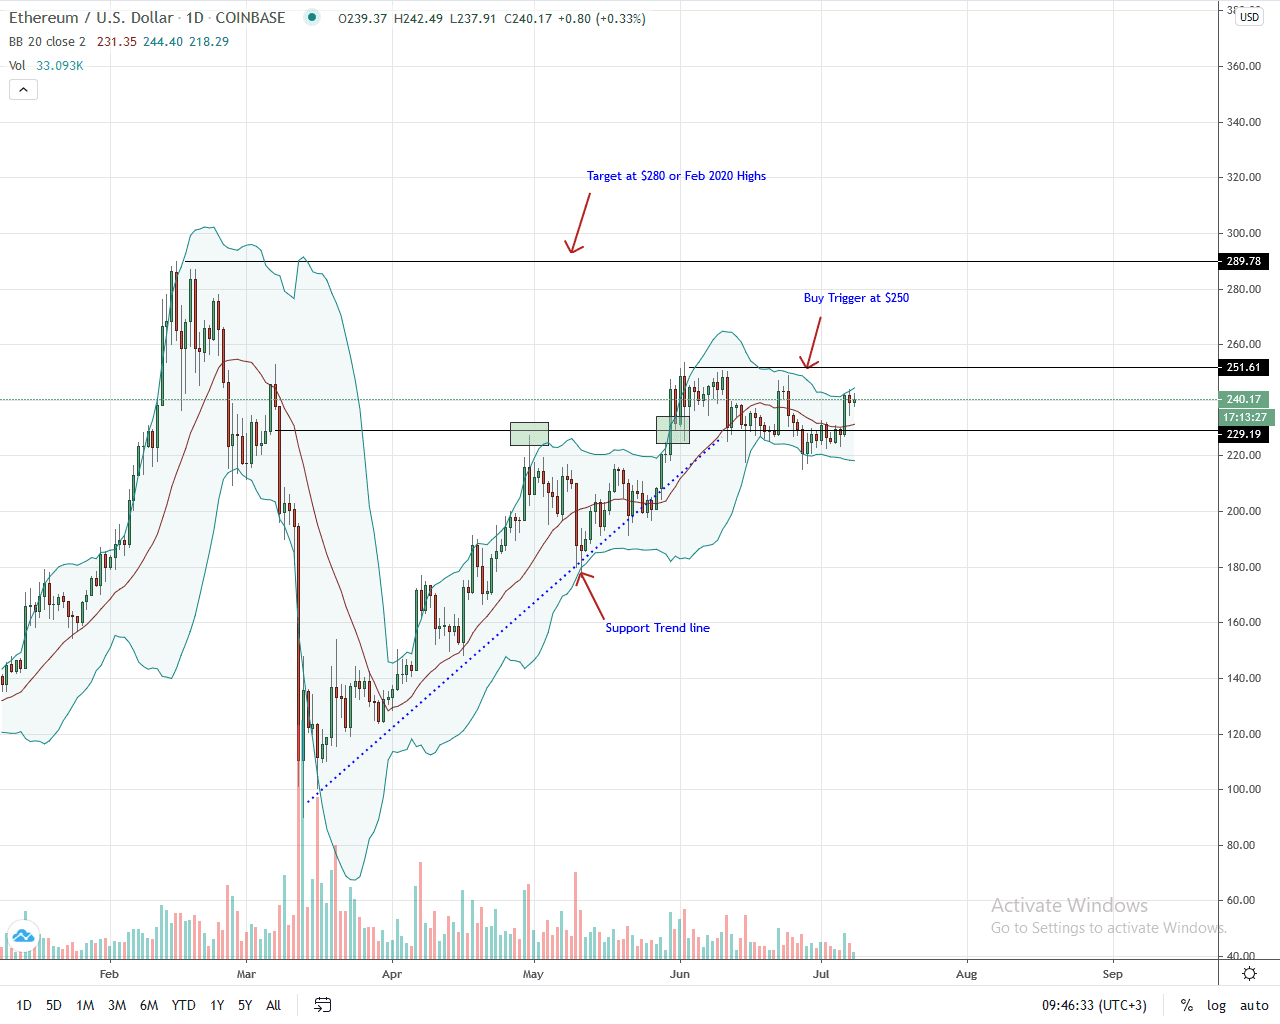 Ethereum Daily Chart for July 8, 2020